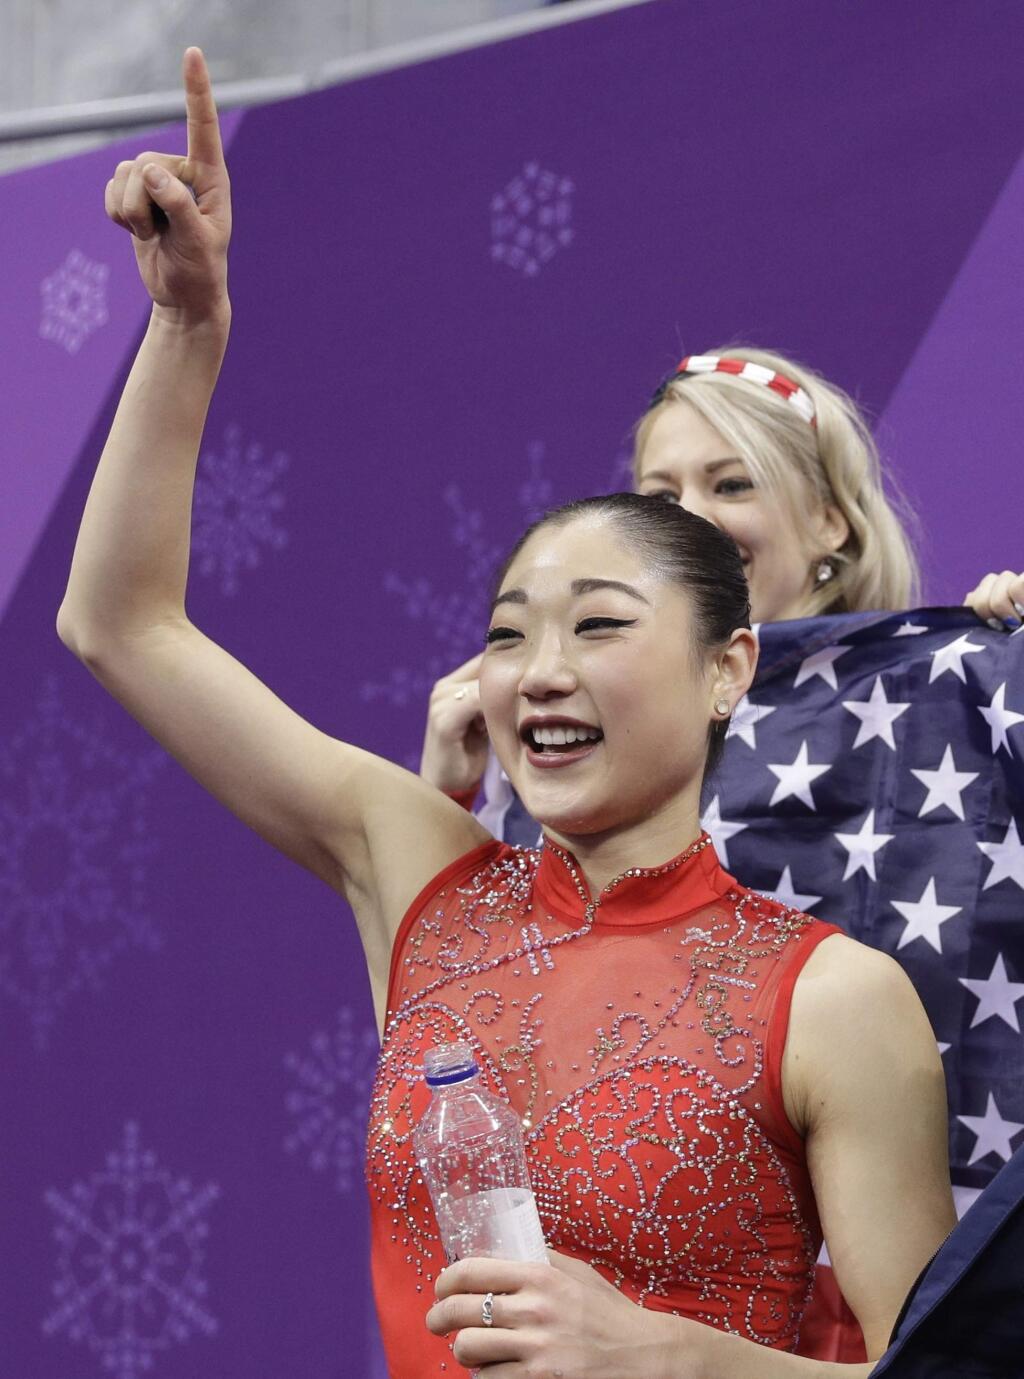 Mirai Nagasu of the United States reacts as she waits for her score in the ladies single skating free skating in the Gangneung Ice Arena at the 2018 Winter Olympics in Gangneung, South Korea, Monday, Feb. 12, 2018. (AP Photo/David J. Phillip)